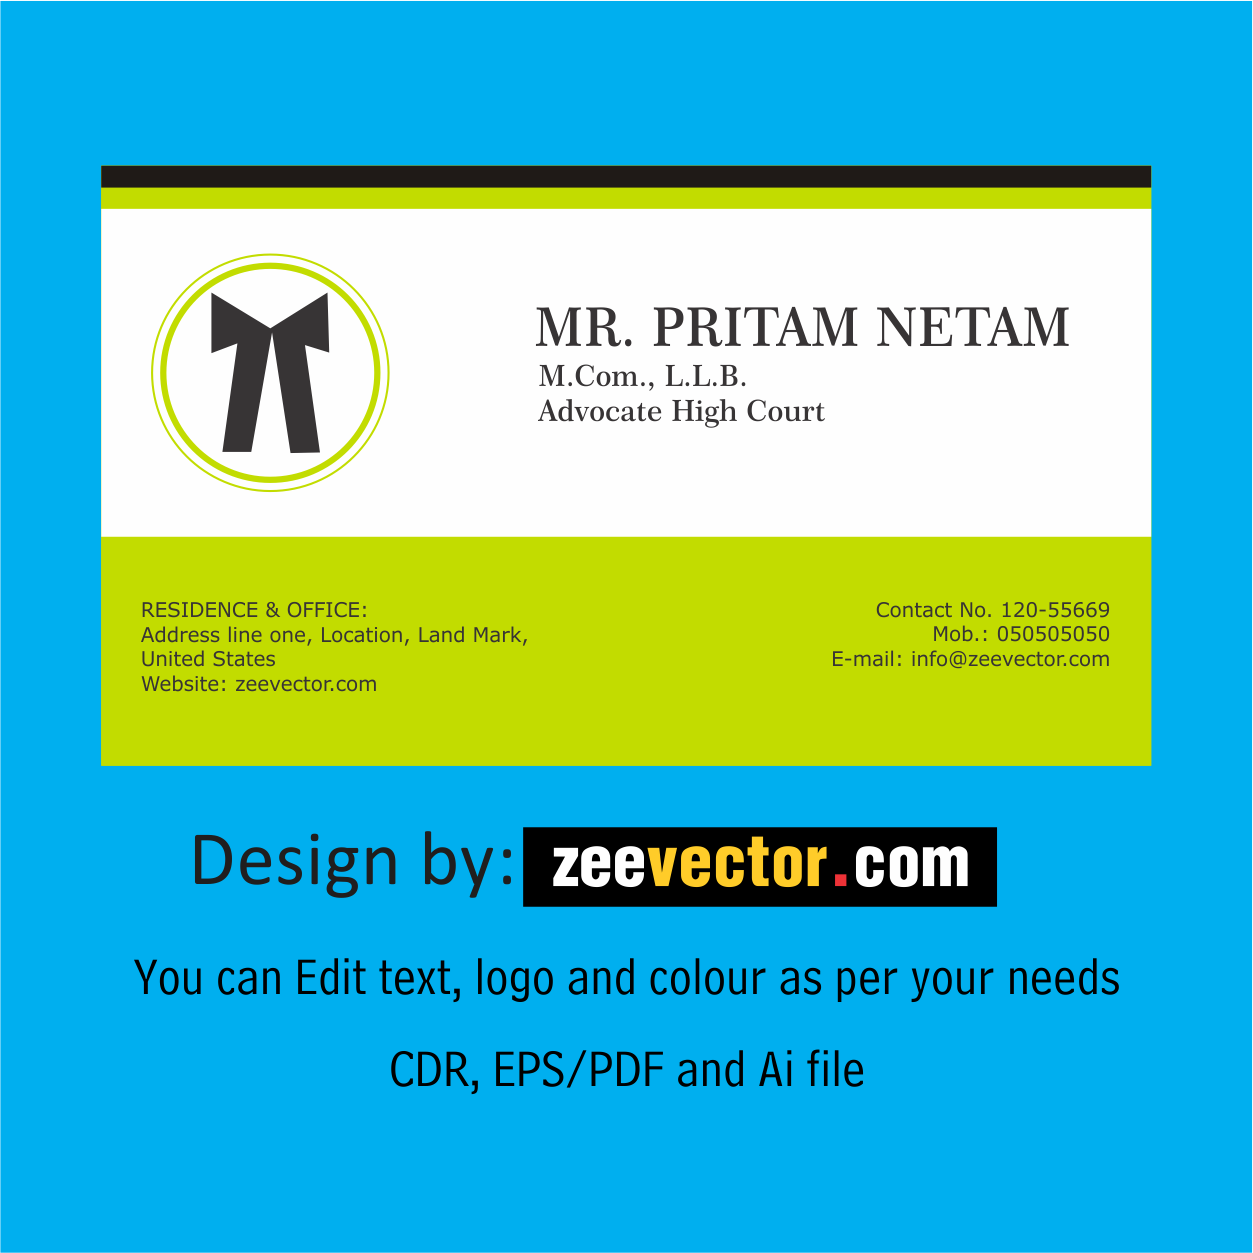 Visiting Card Vector Archives - Page 2 of 9 - FREE Vector Design - Cdr, Ai,  EPS, PNG, SVG